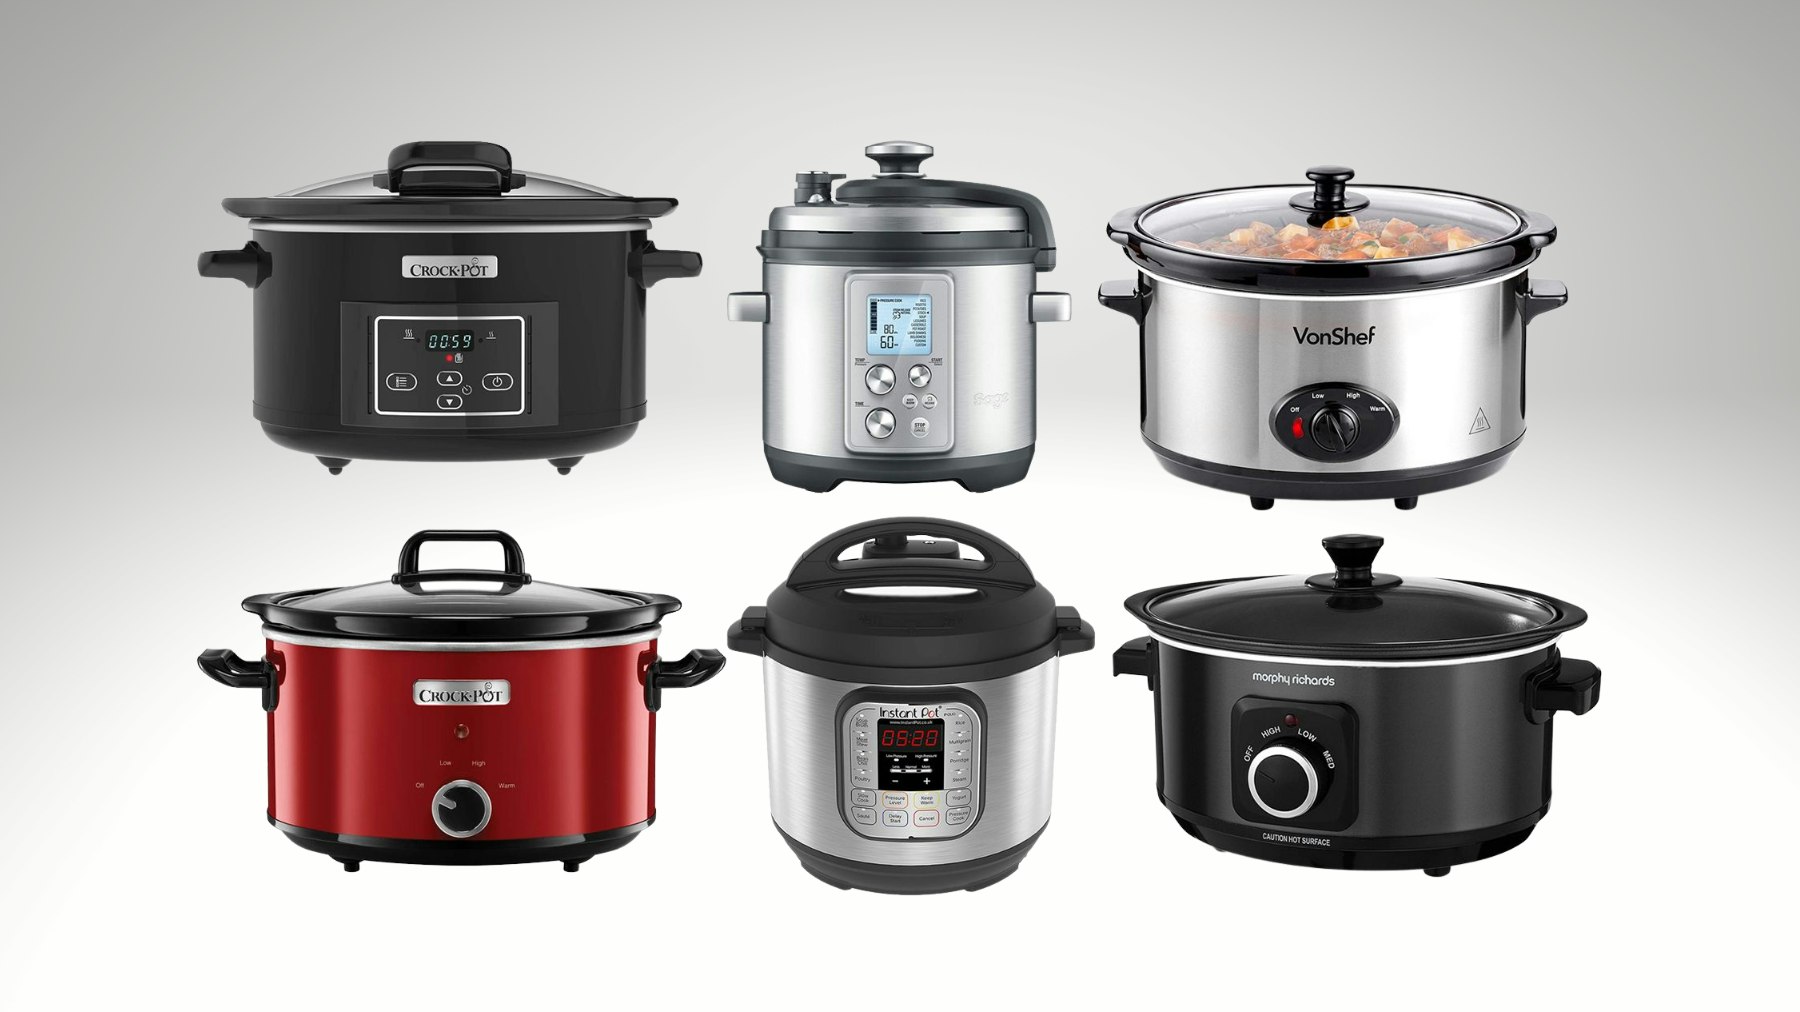 https://images.bauerhosting.com/legacy/media/6005/6beb/b778/5566/b590/b89f/best-slow-cookers.png?ar=16%3A9&fit=crop&crop=top&auto=format&w=undefined&q=80